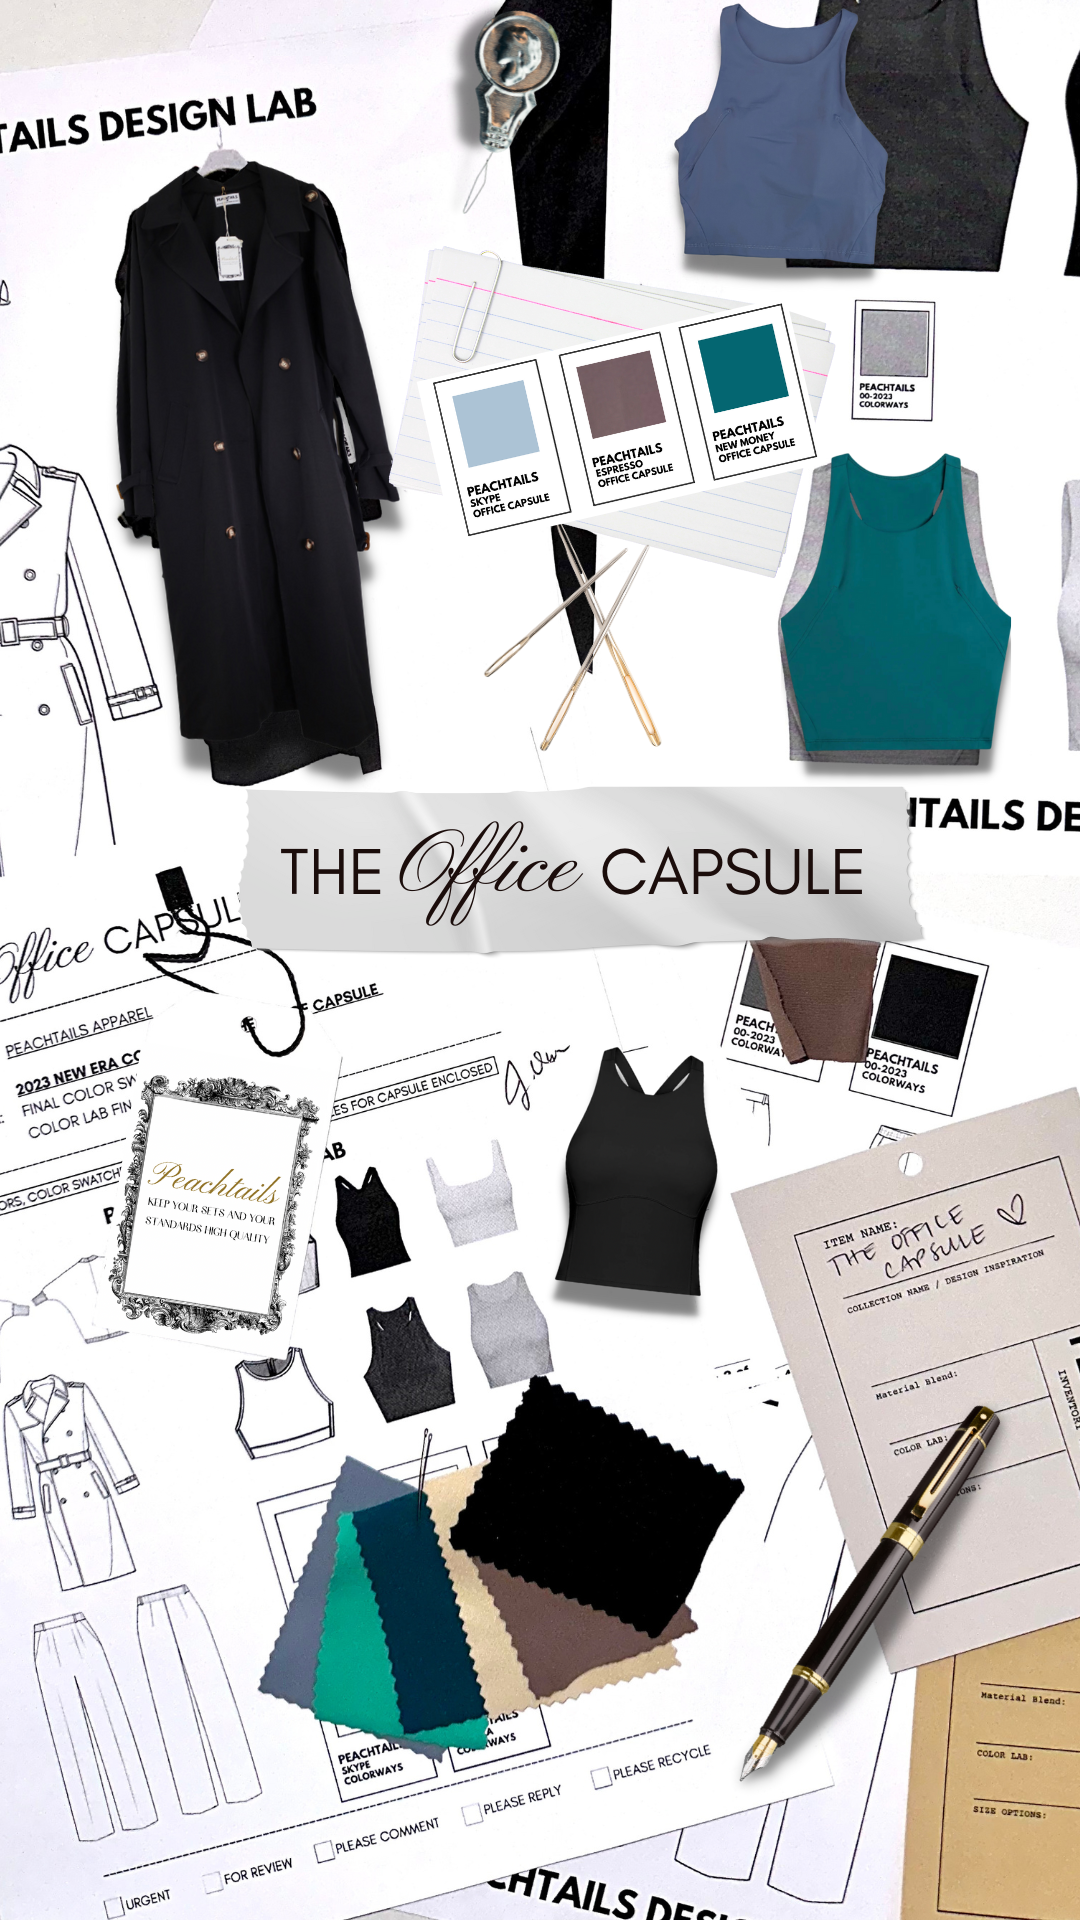 The image is a creative mood board for "THE OFFICE CAPSULE" by PEACHTAILS DESIGN LAB. It includes sketches of professional attire, fabric swatches in earthy and teal tones, and actual clothing items like a tank top. There are also design tools such as pens and color palettes, alongside notes and branding elements, all arranged in a visually appealing collage that suggests a sophisticated and coordinated office wear collection.